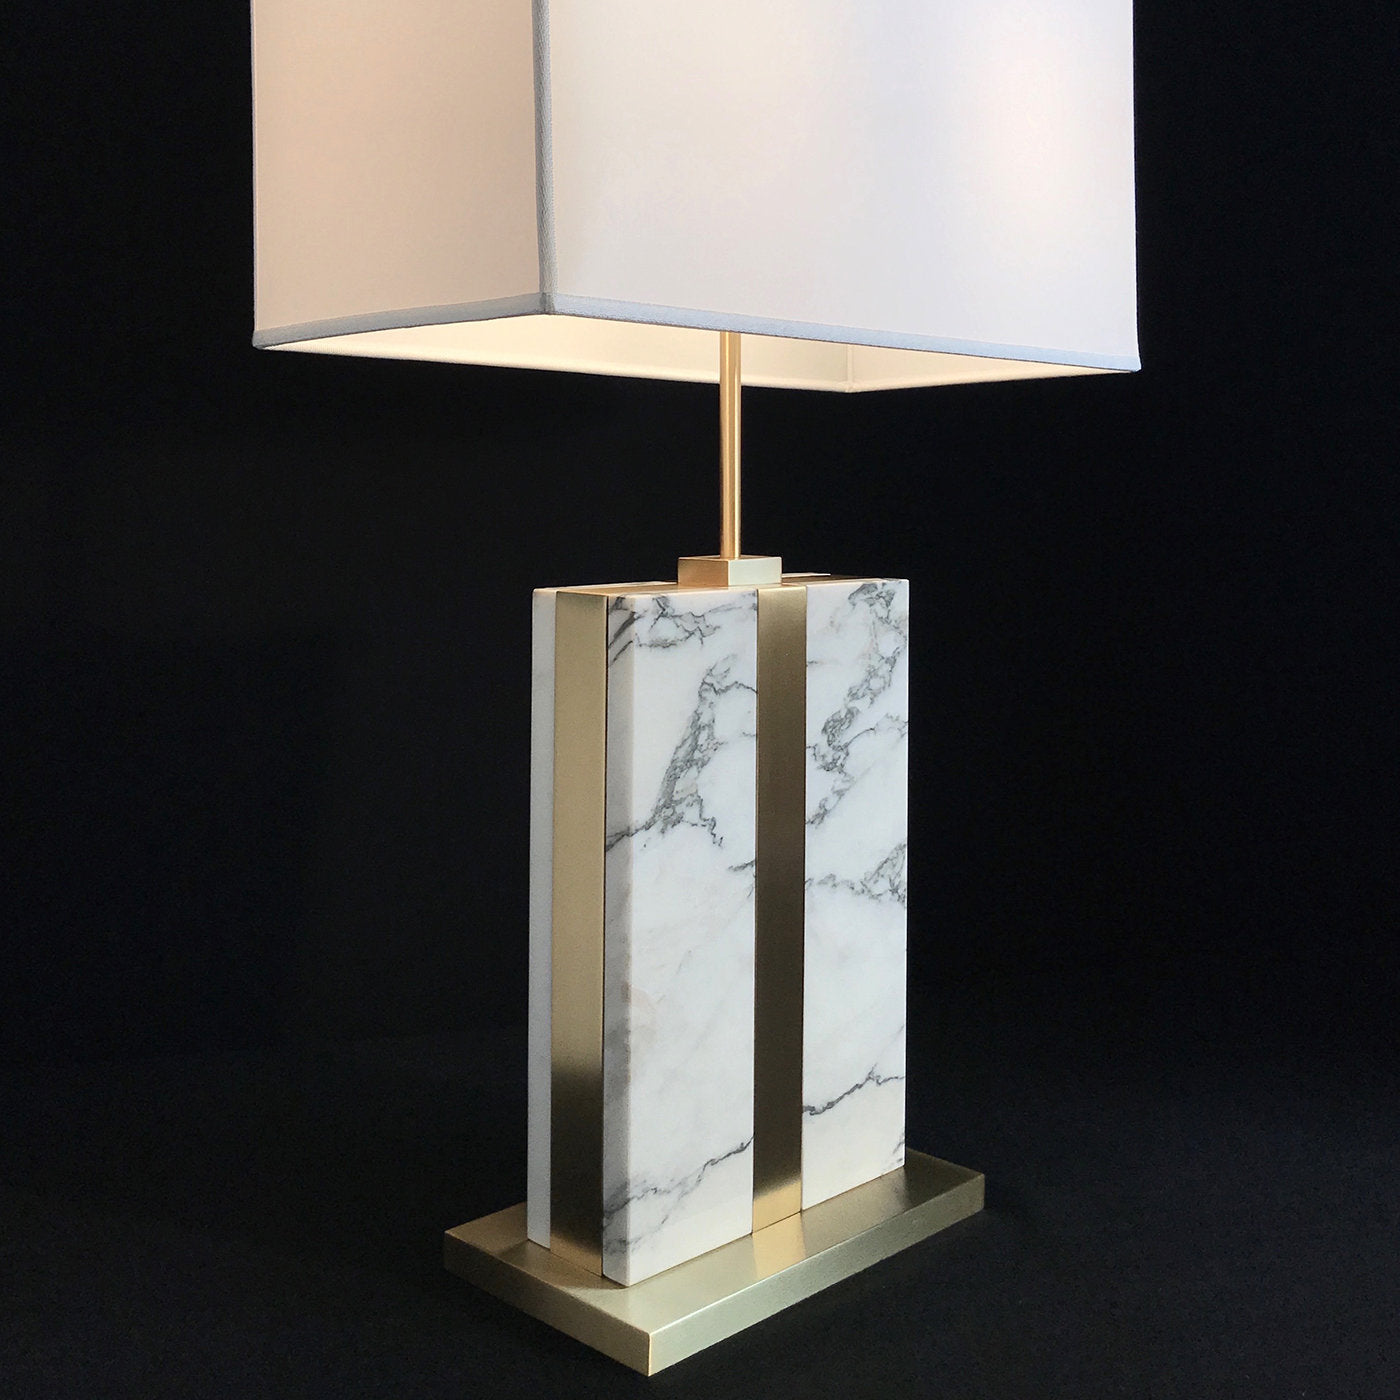 Brera Carrara Marble Table Lamp with Ivory Parchment Shade - Alternative view 3